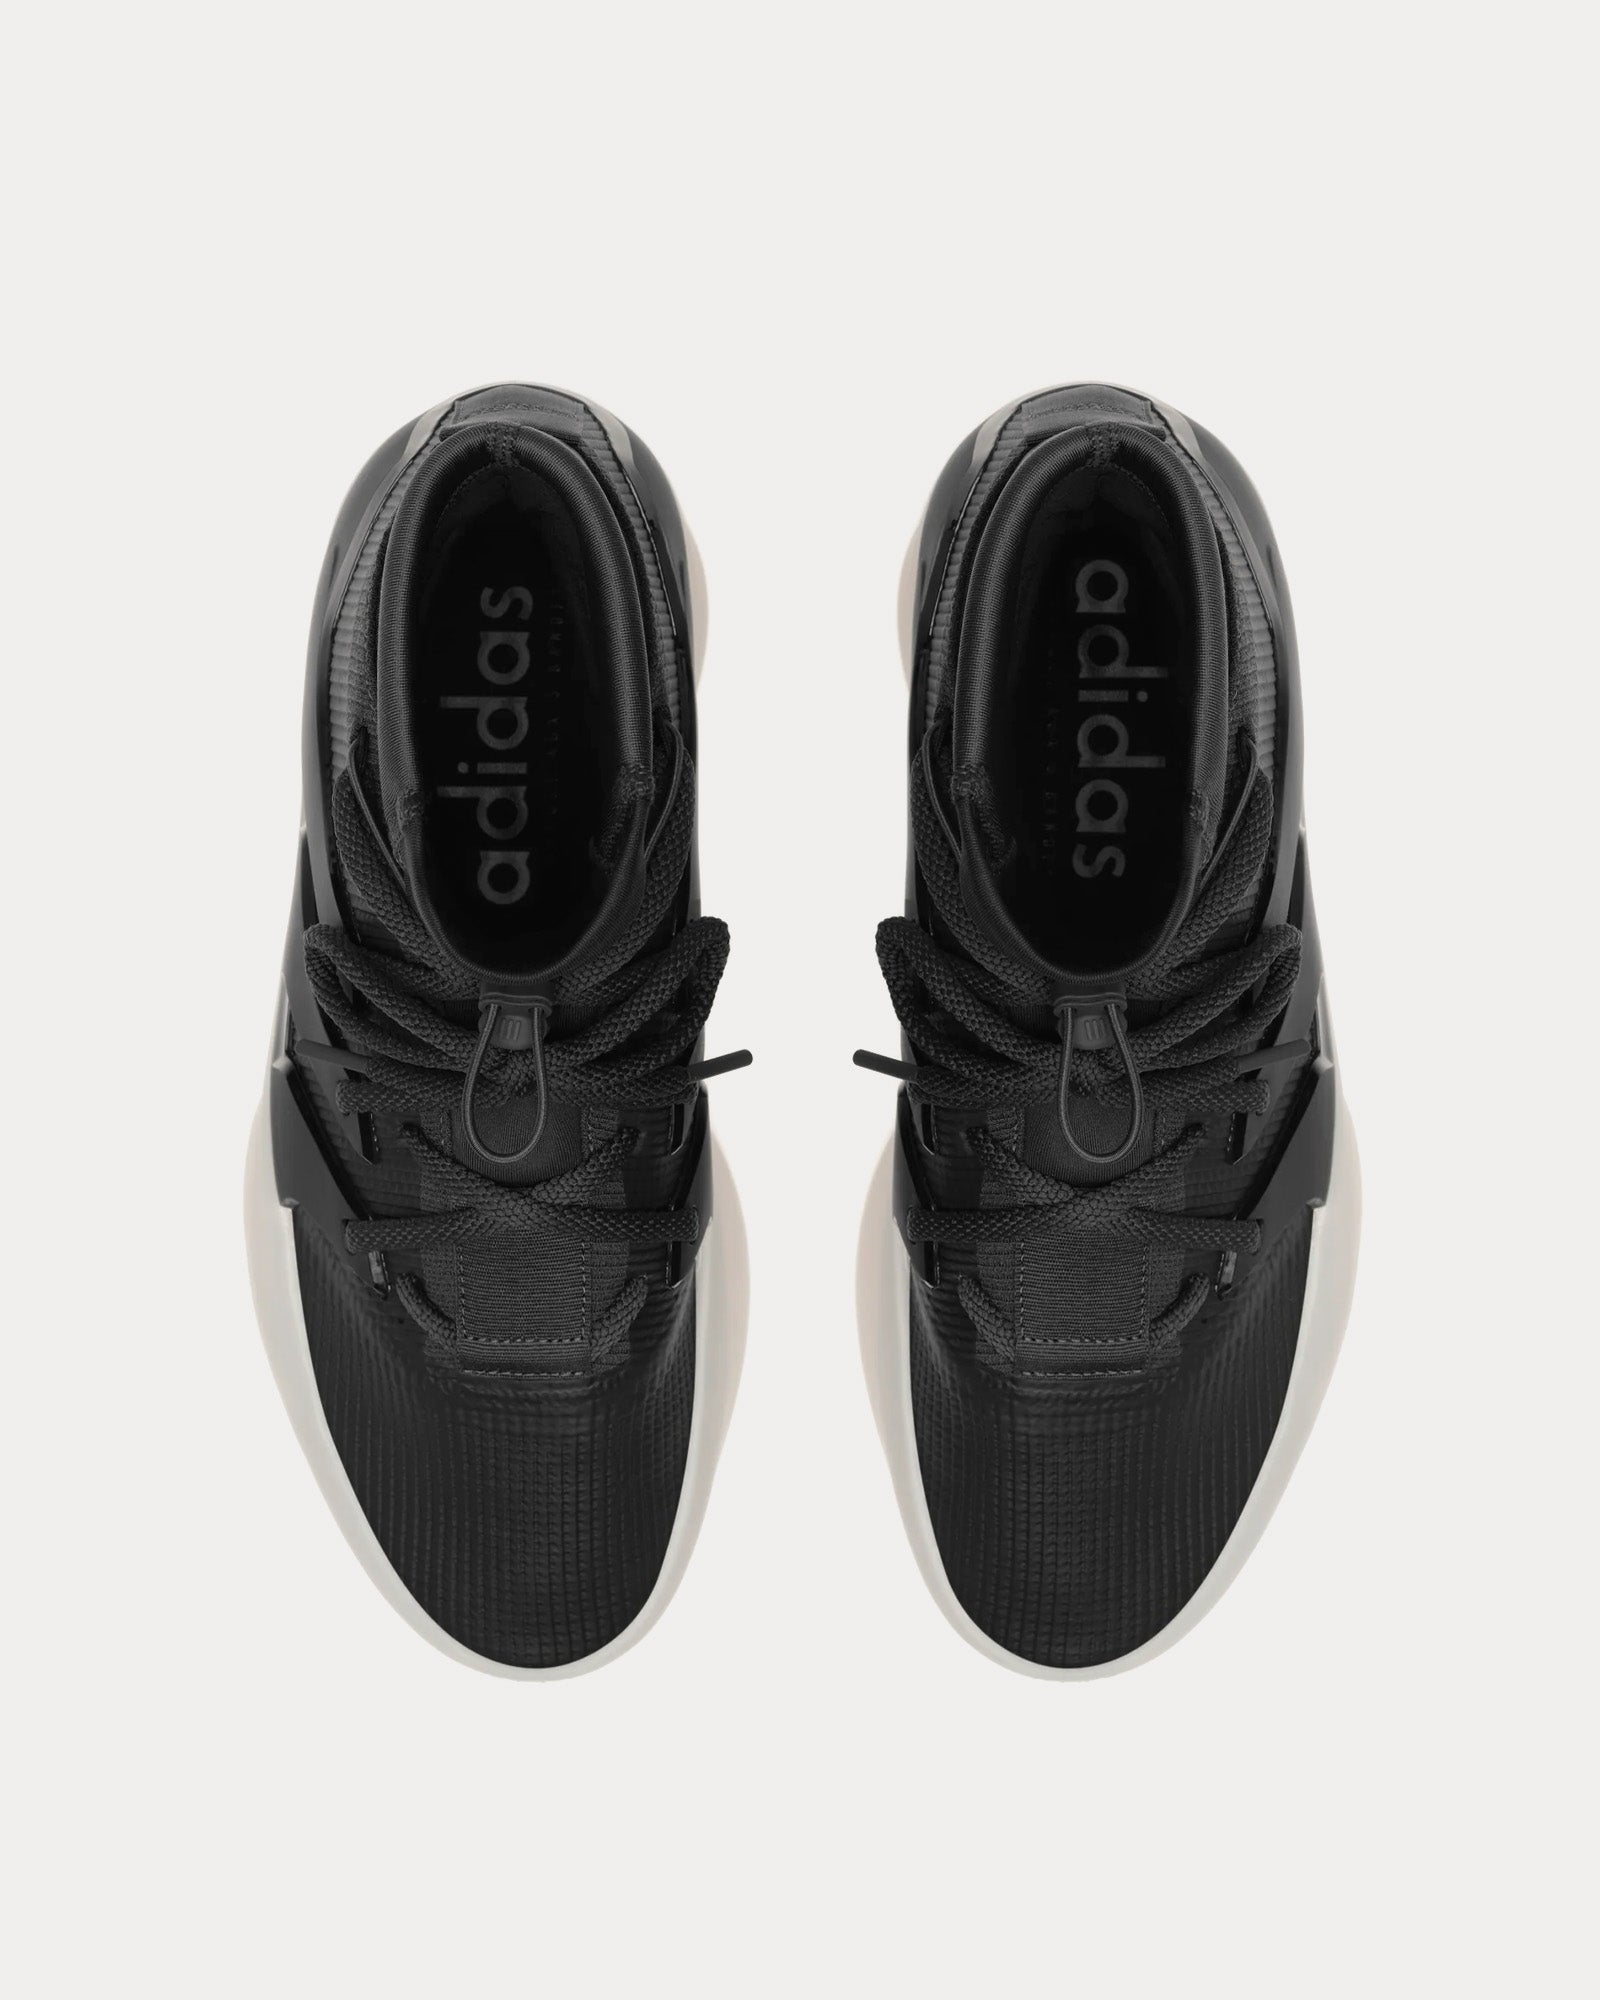 Fear of God Athletics - I Basketball Carbon / Carbon High Top Sneakers